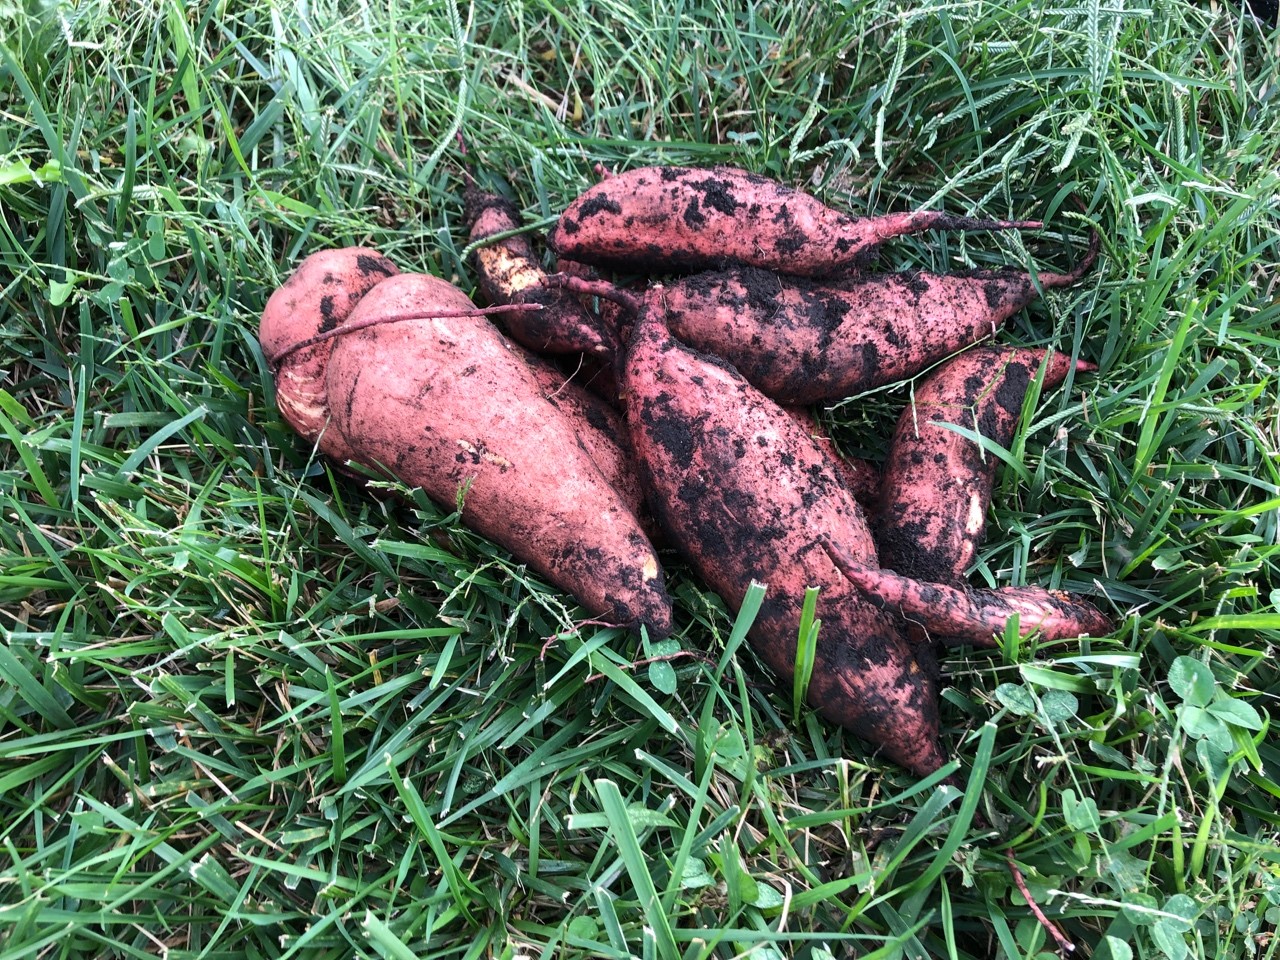 Sweet potatoes covered in dirt